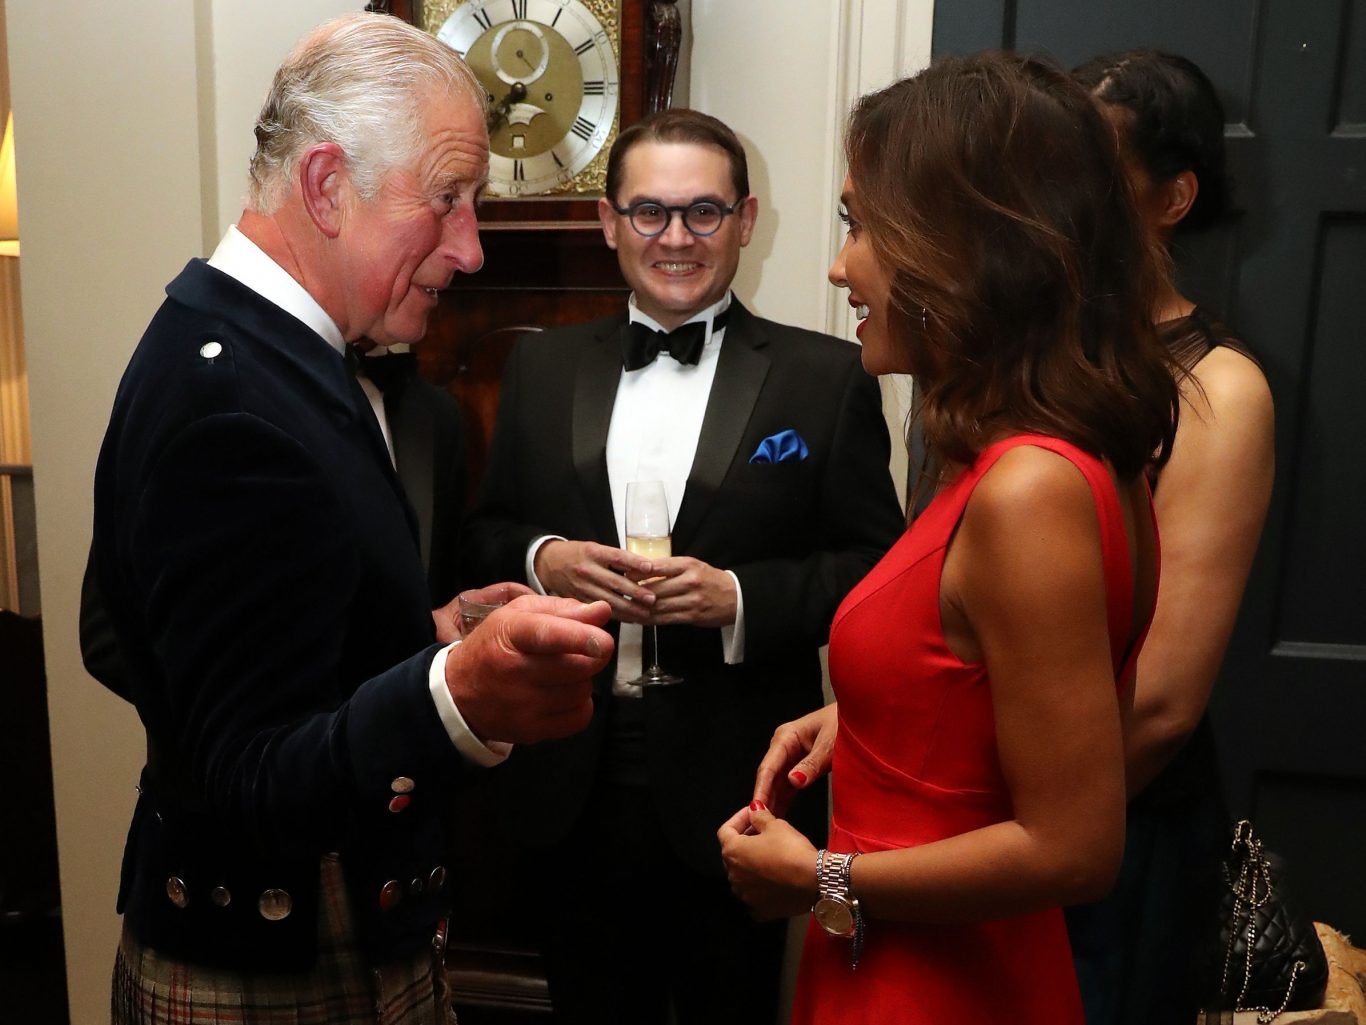 The Prince of Wales meets Myleene Klass as he attends Classic FM's 25th anniversary recital at Dumfries House in Cumnock (Andrew Milligan/PA)